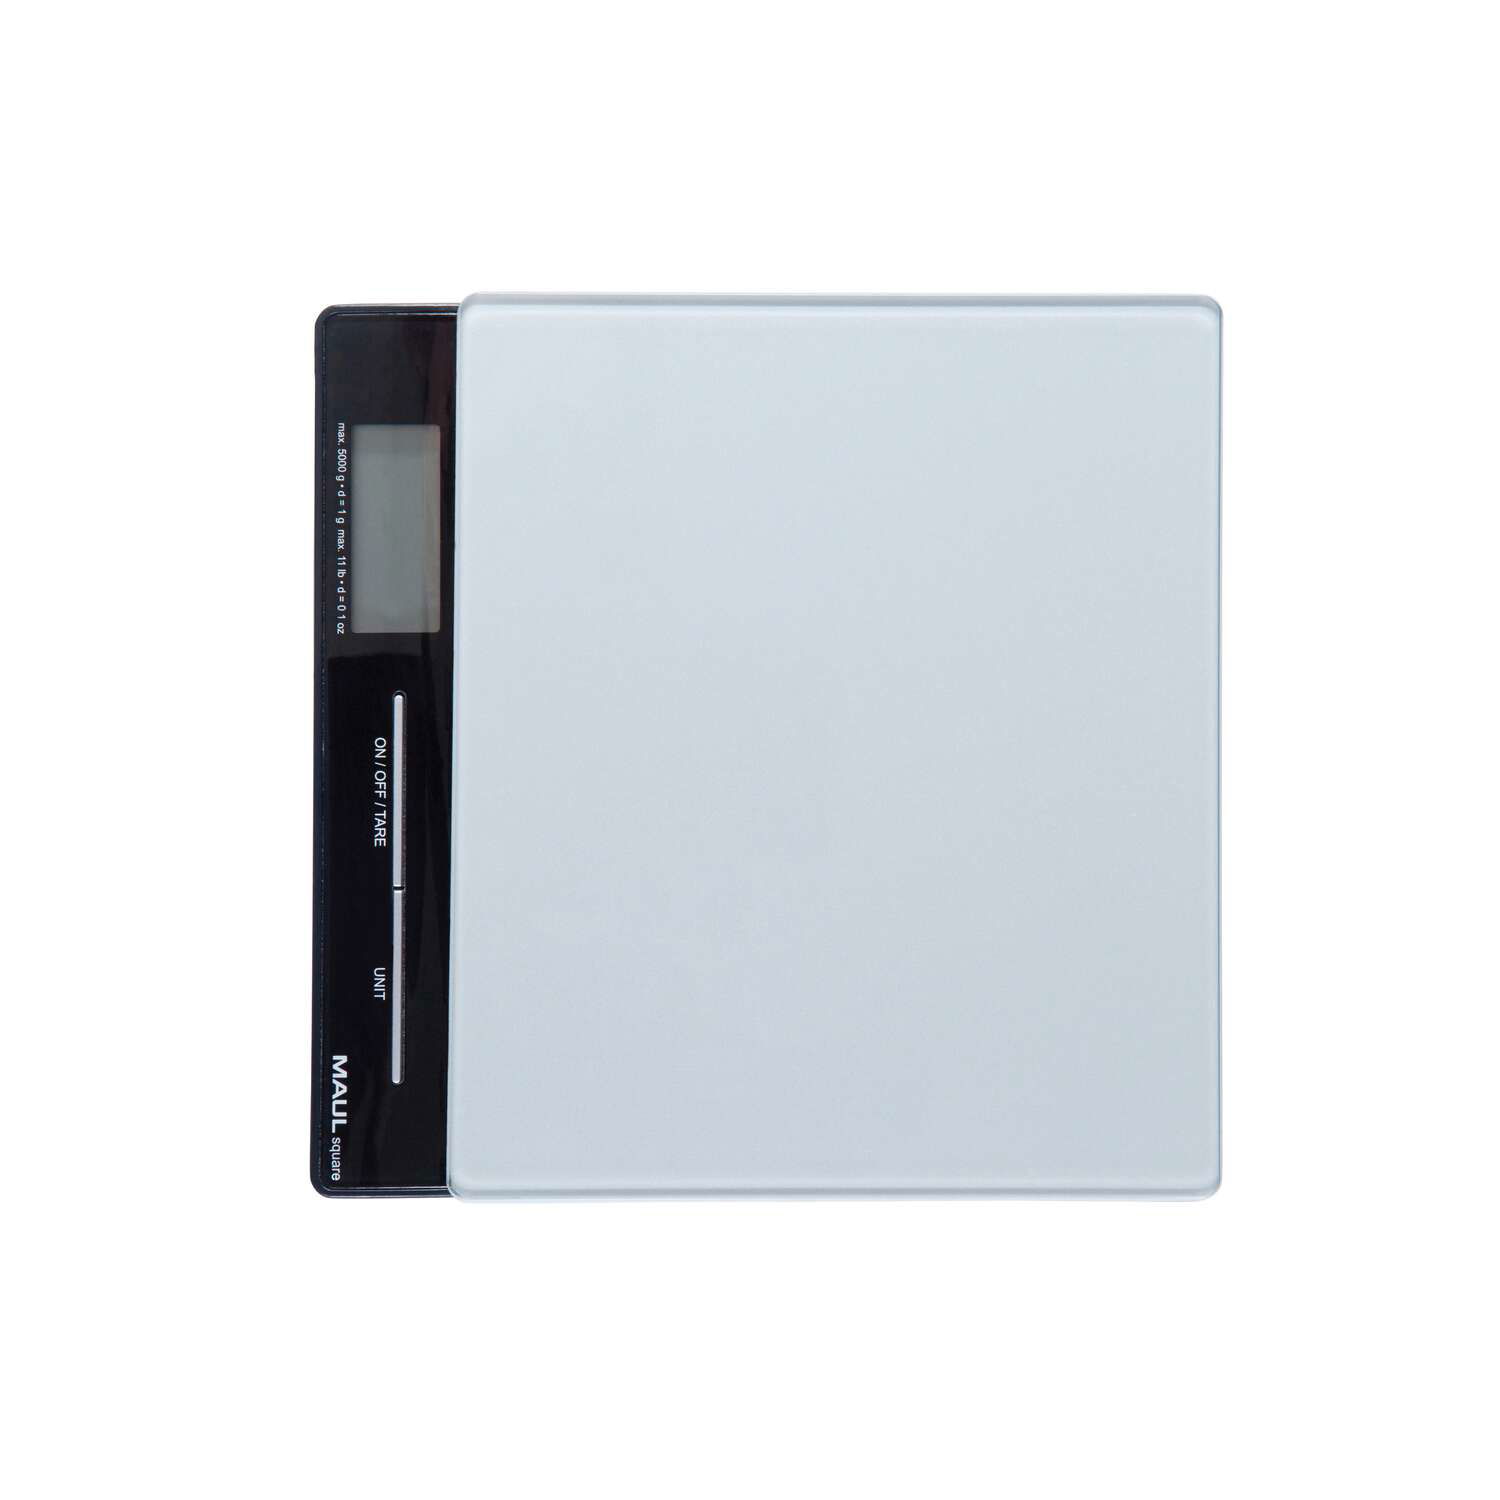 Briefwaage MAULsquare mit Batterie, 5000 g